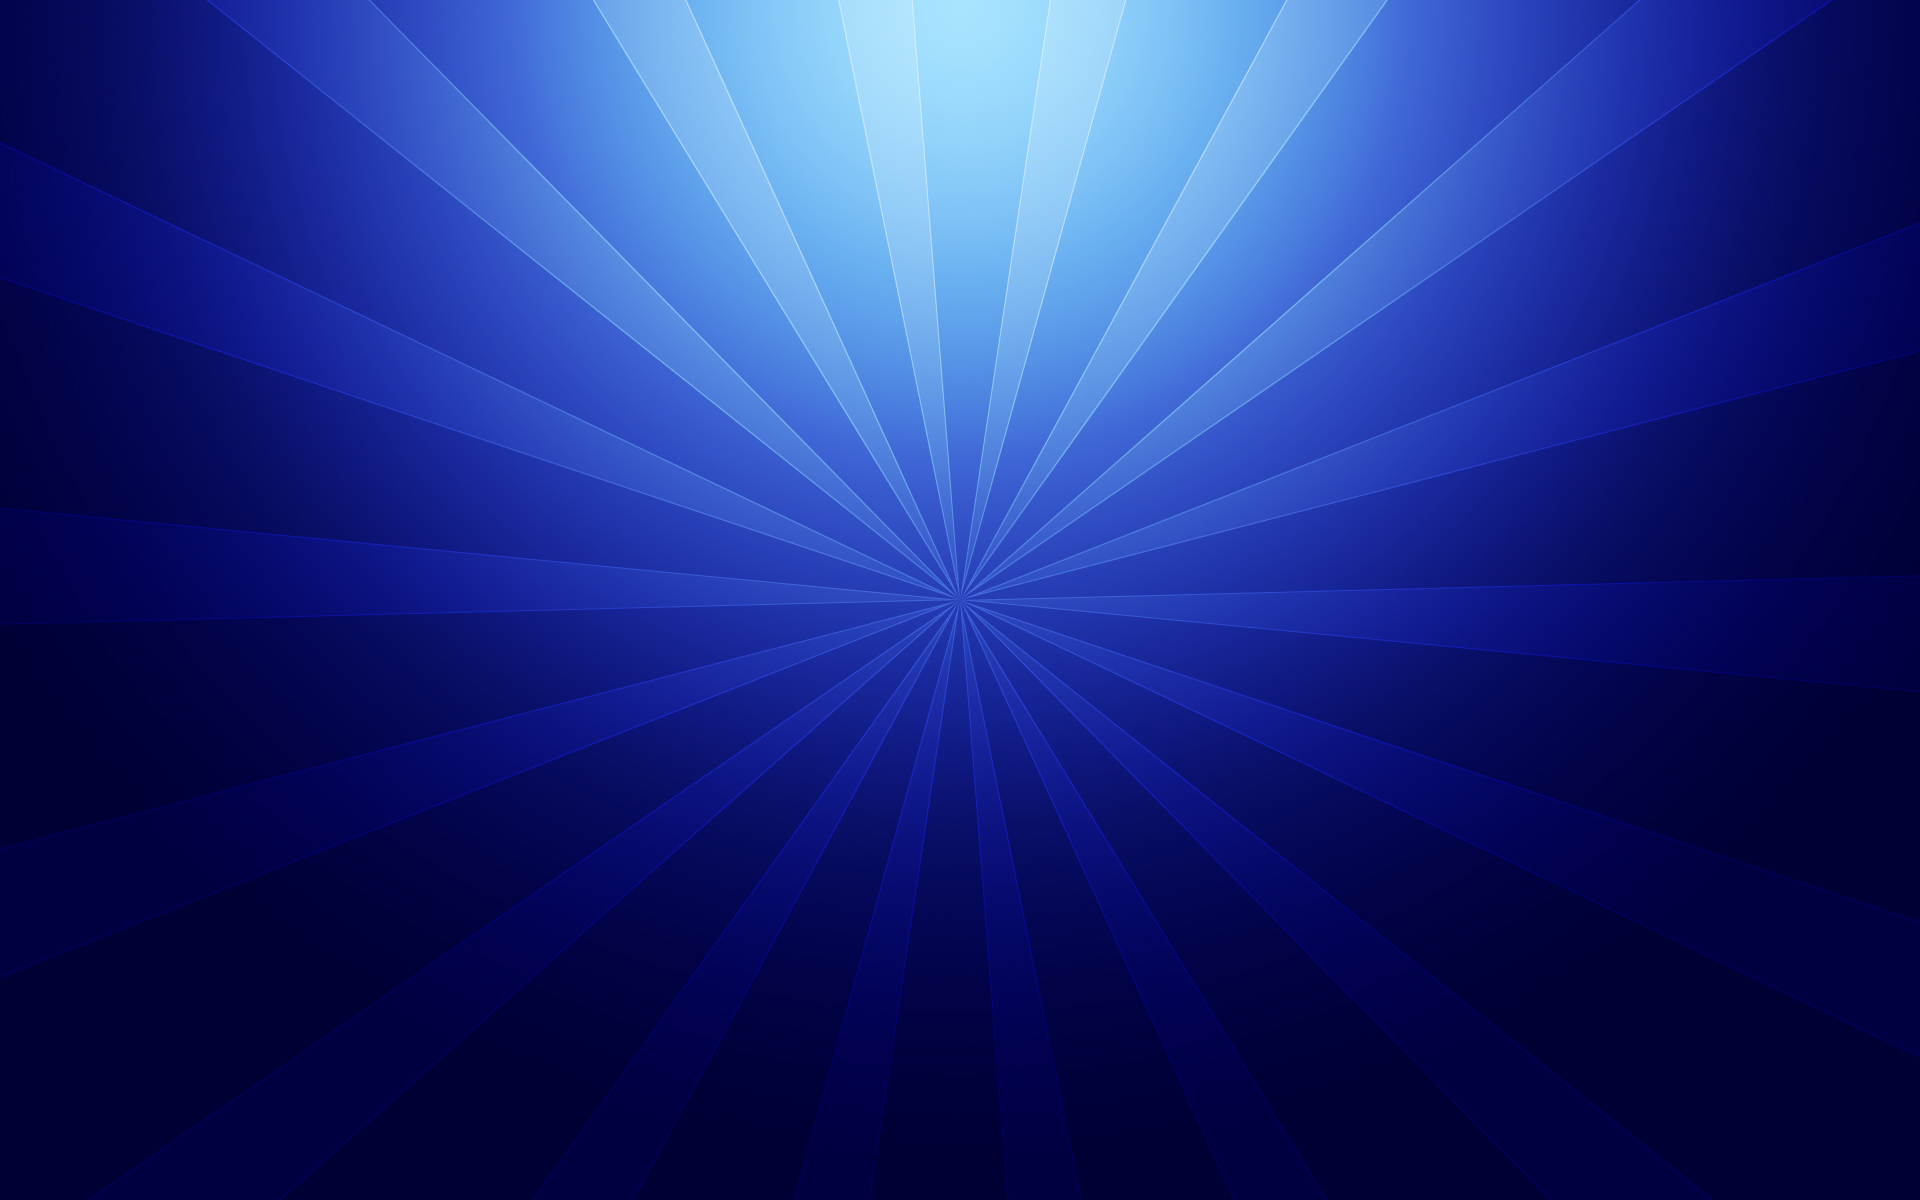 Cool Blue Background wallpaper | 1920x1200 | #10167